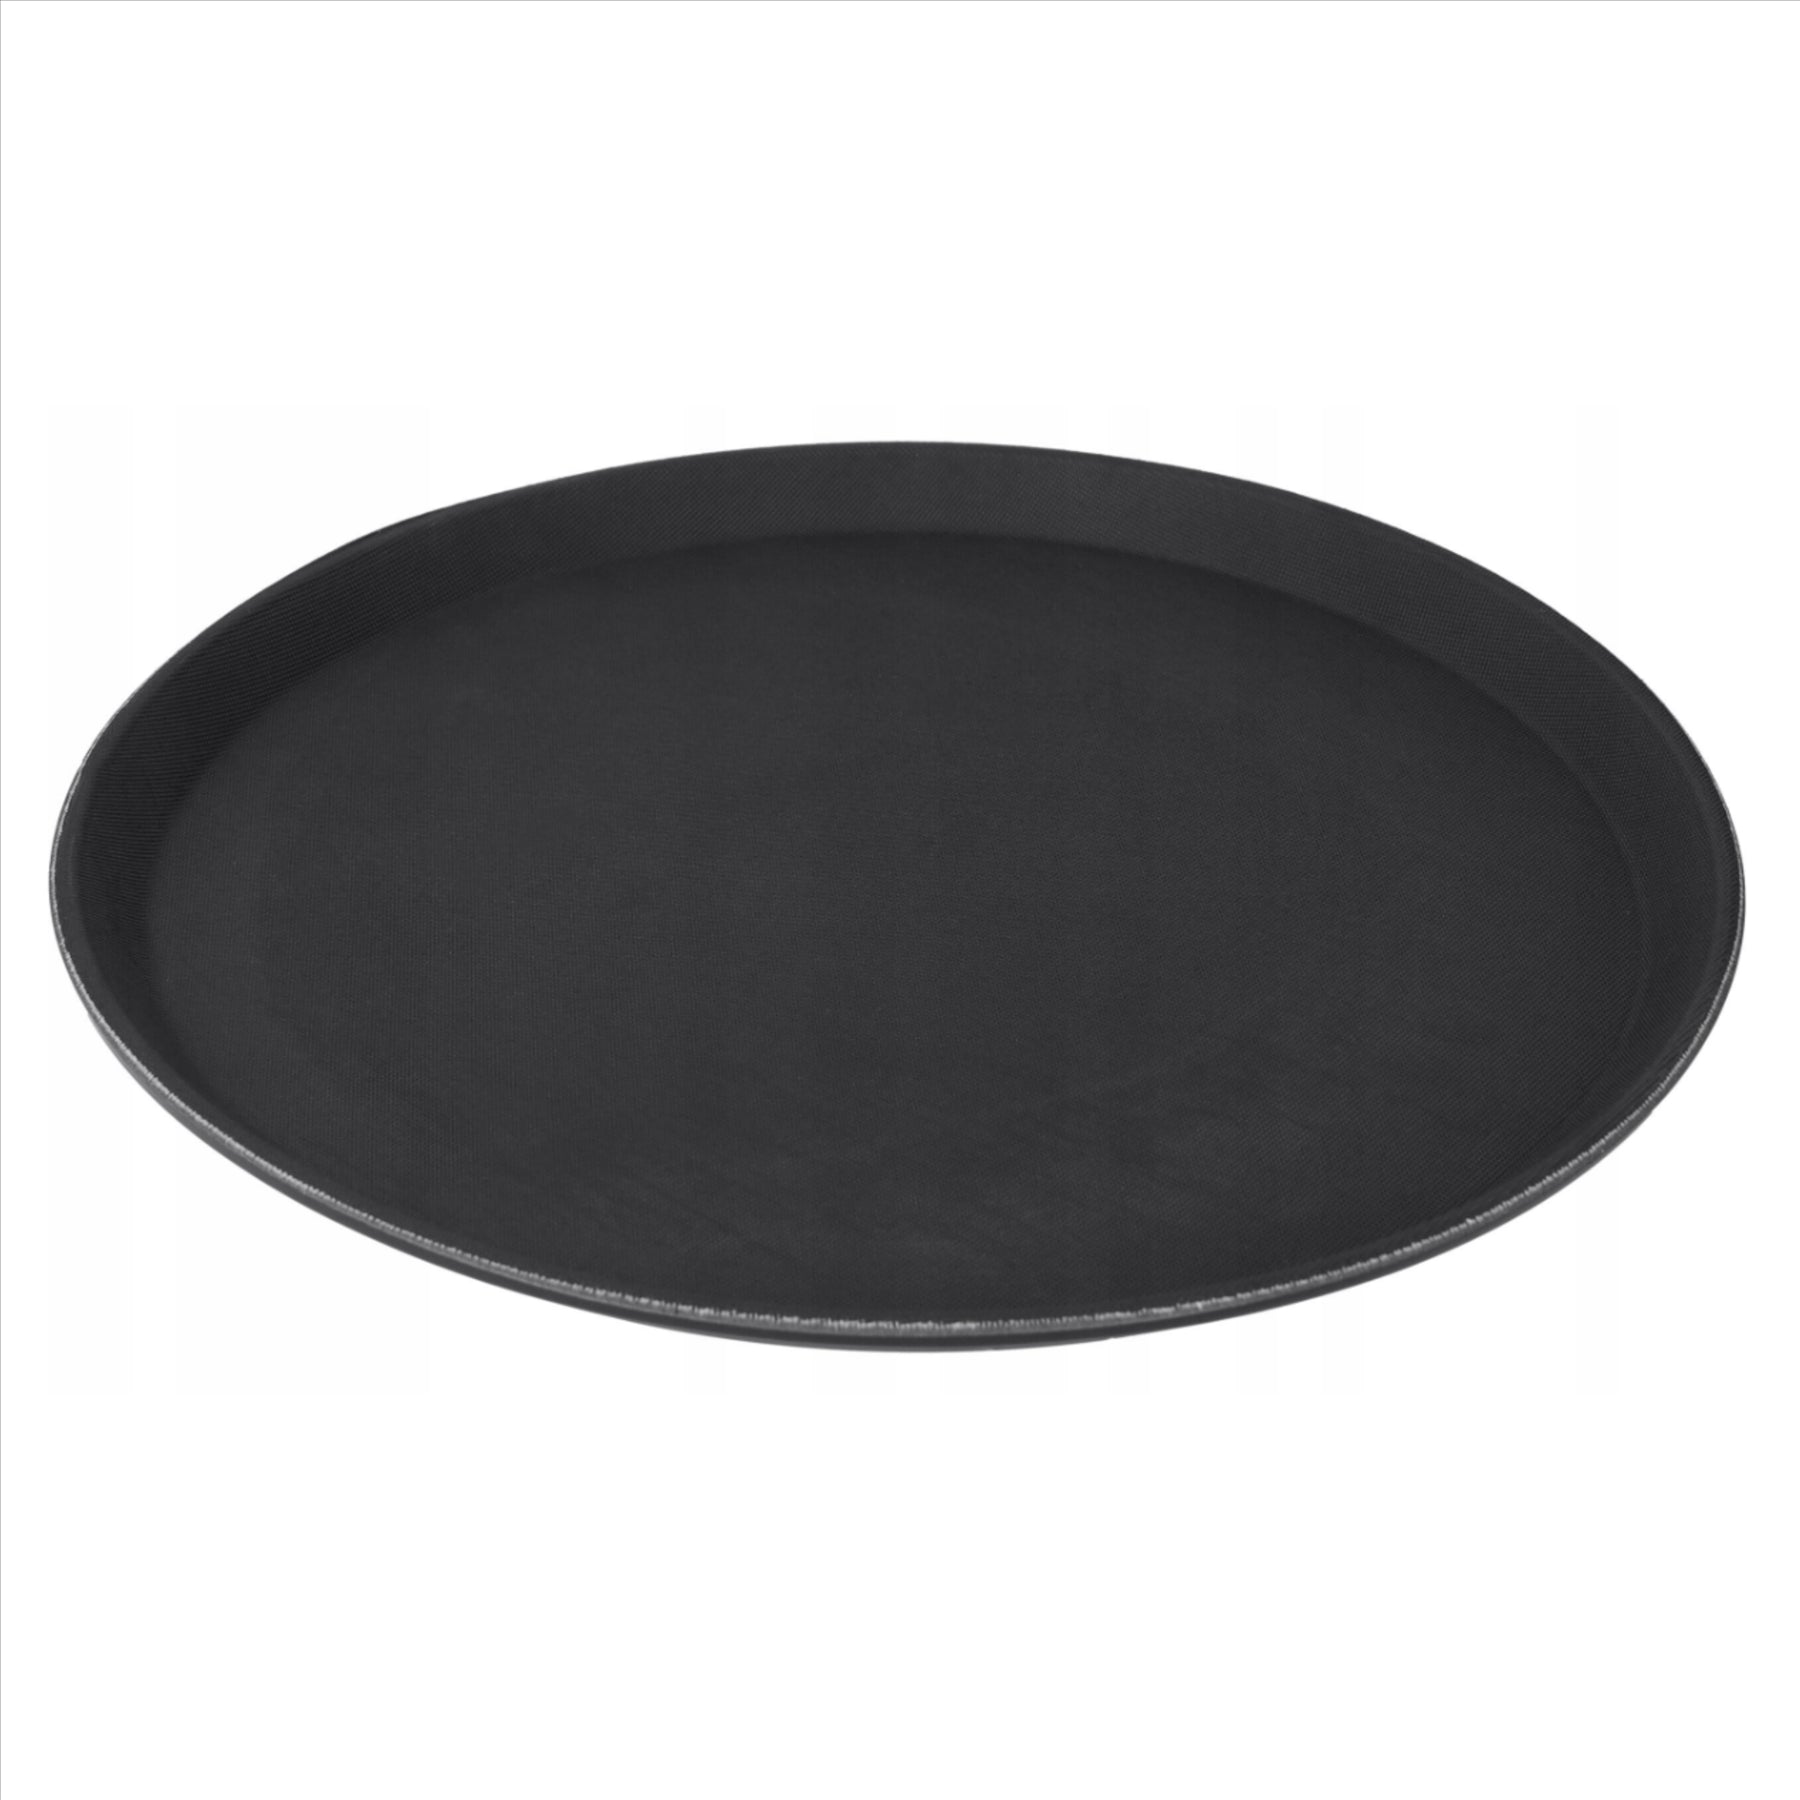 Non-Slip Black Textured Serving Tray by GEEZY - UKBuyZone